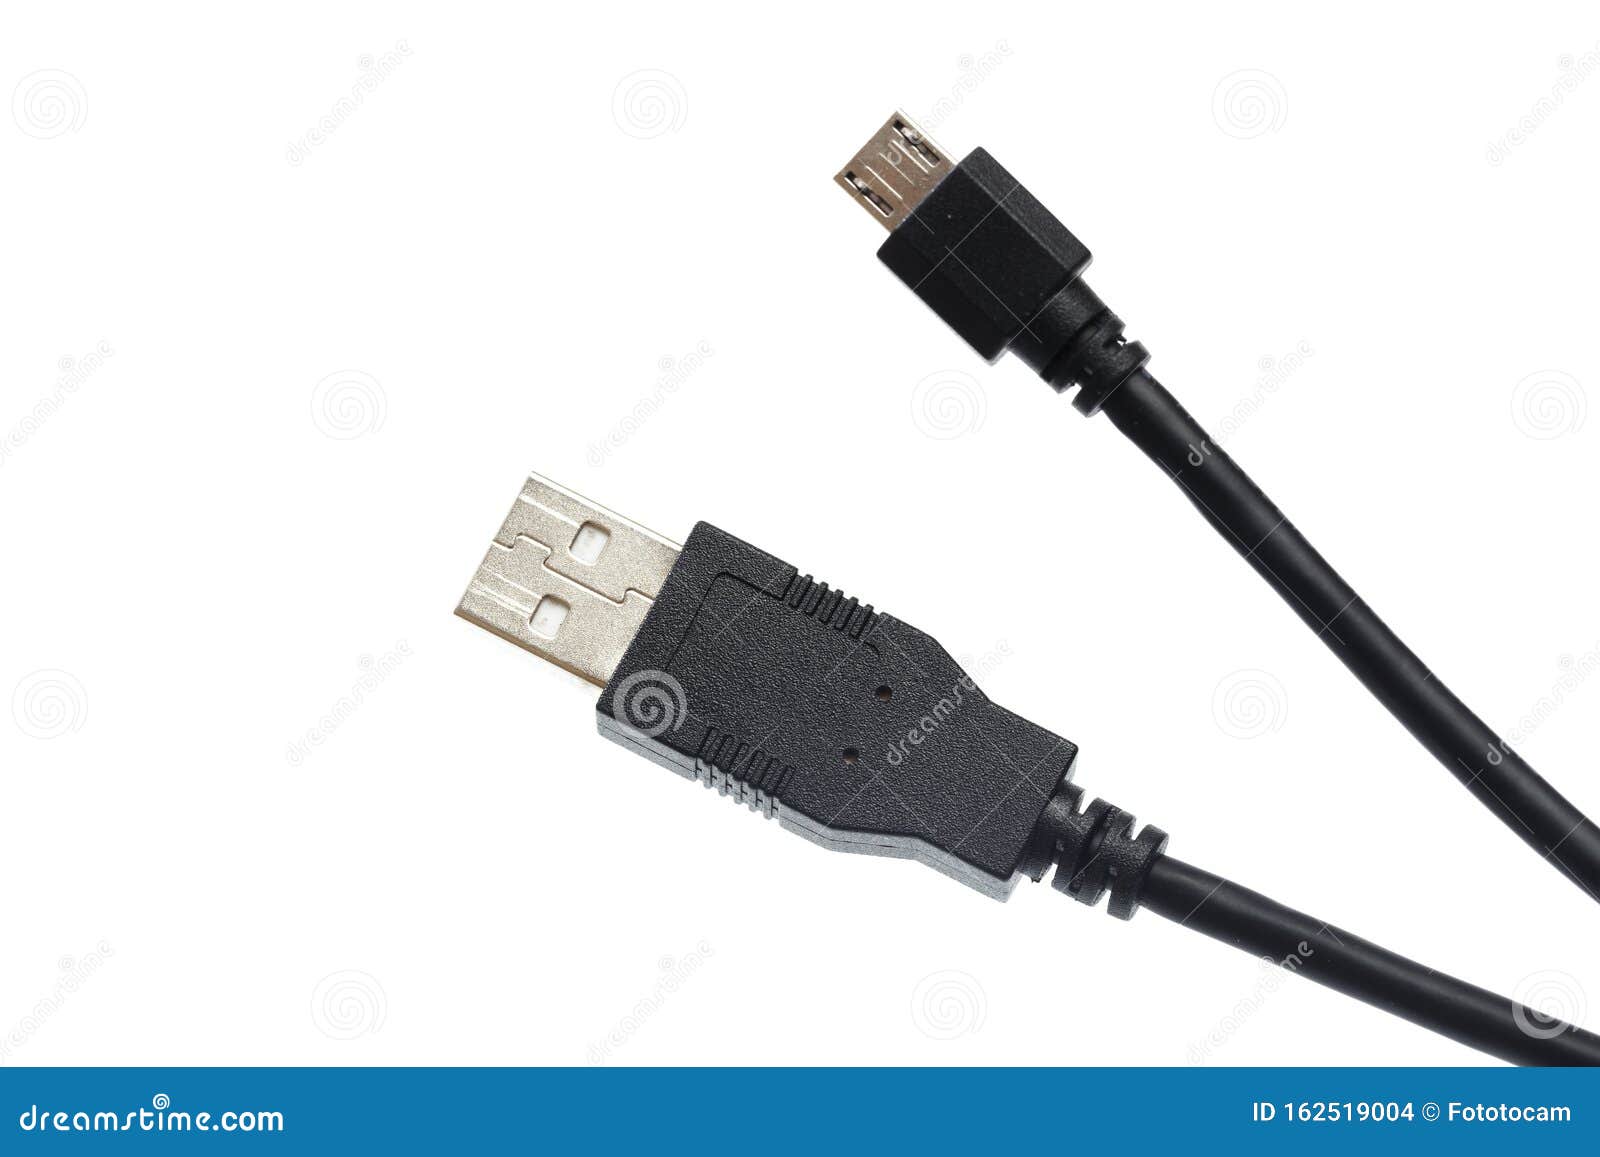 mico usb cable  on white background  - image